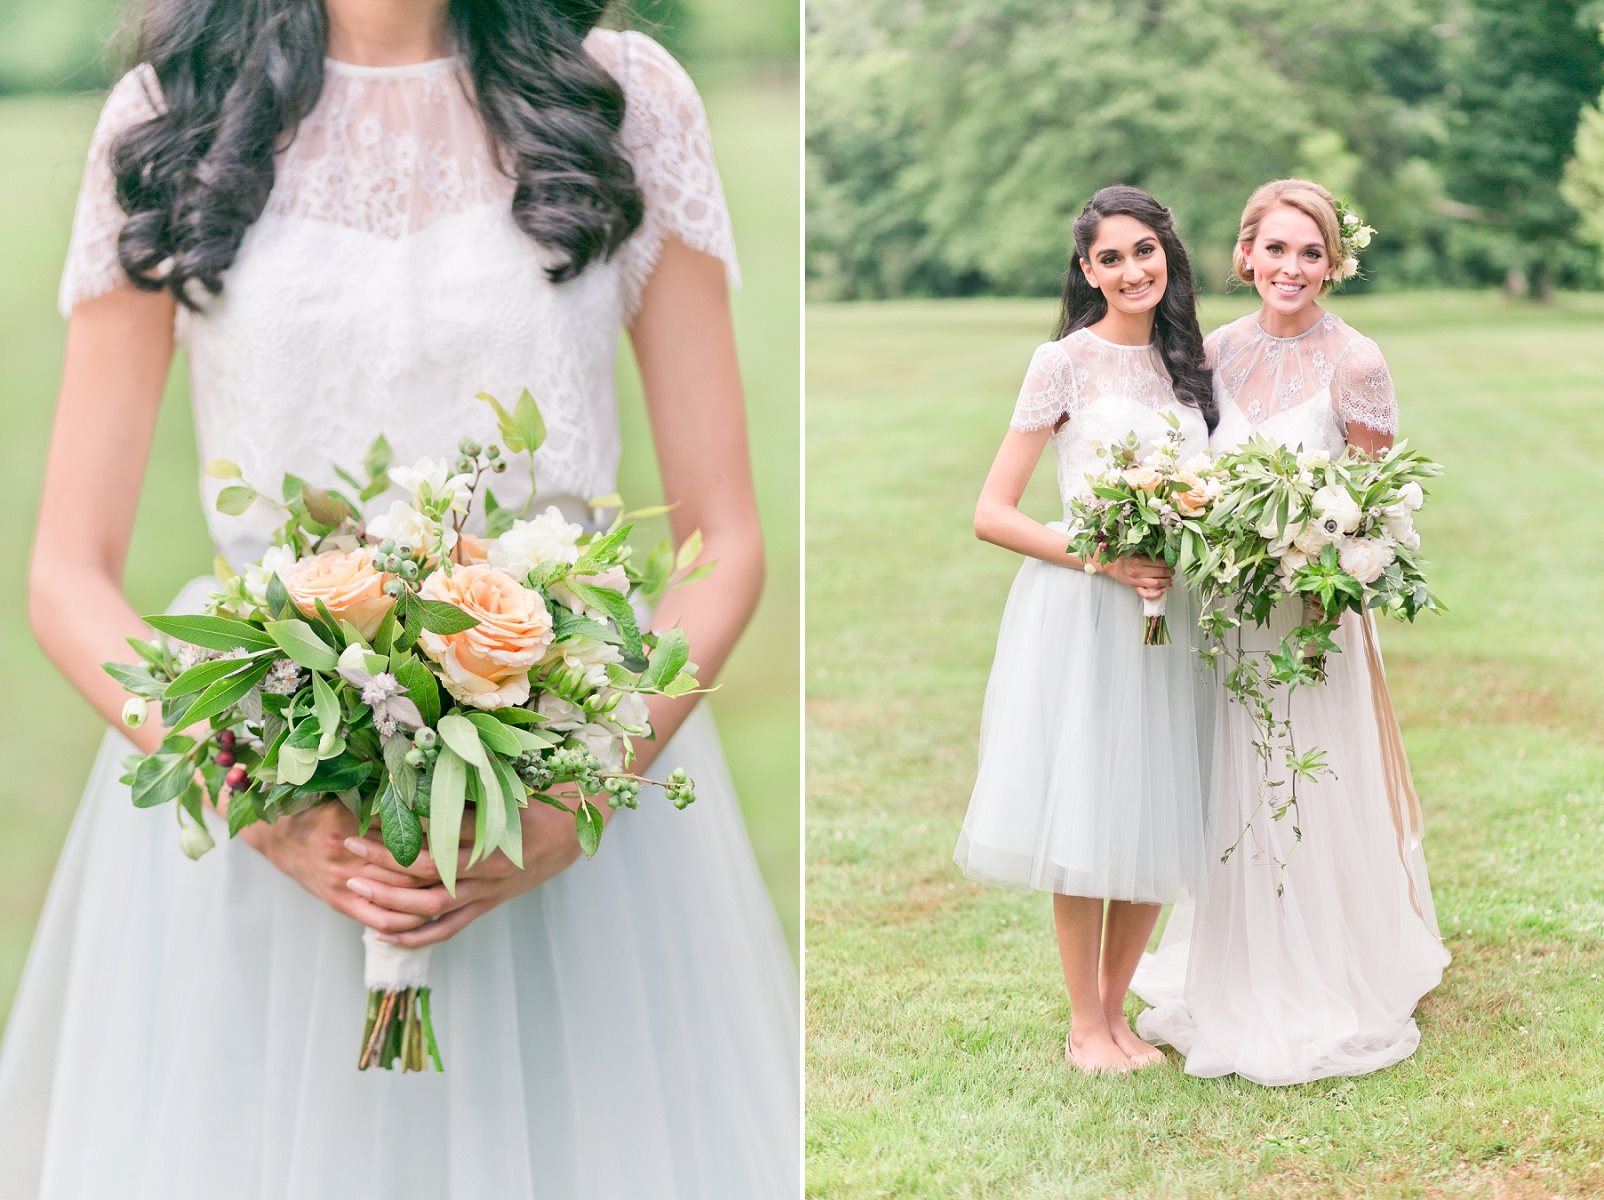 Bridesmaid Bouquet - Pretty Spring Wedding Ideas in Soft Pastels and Rose Gold